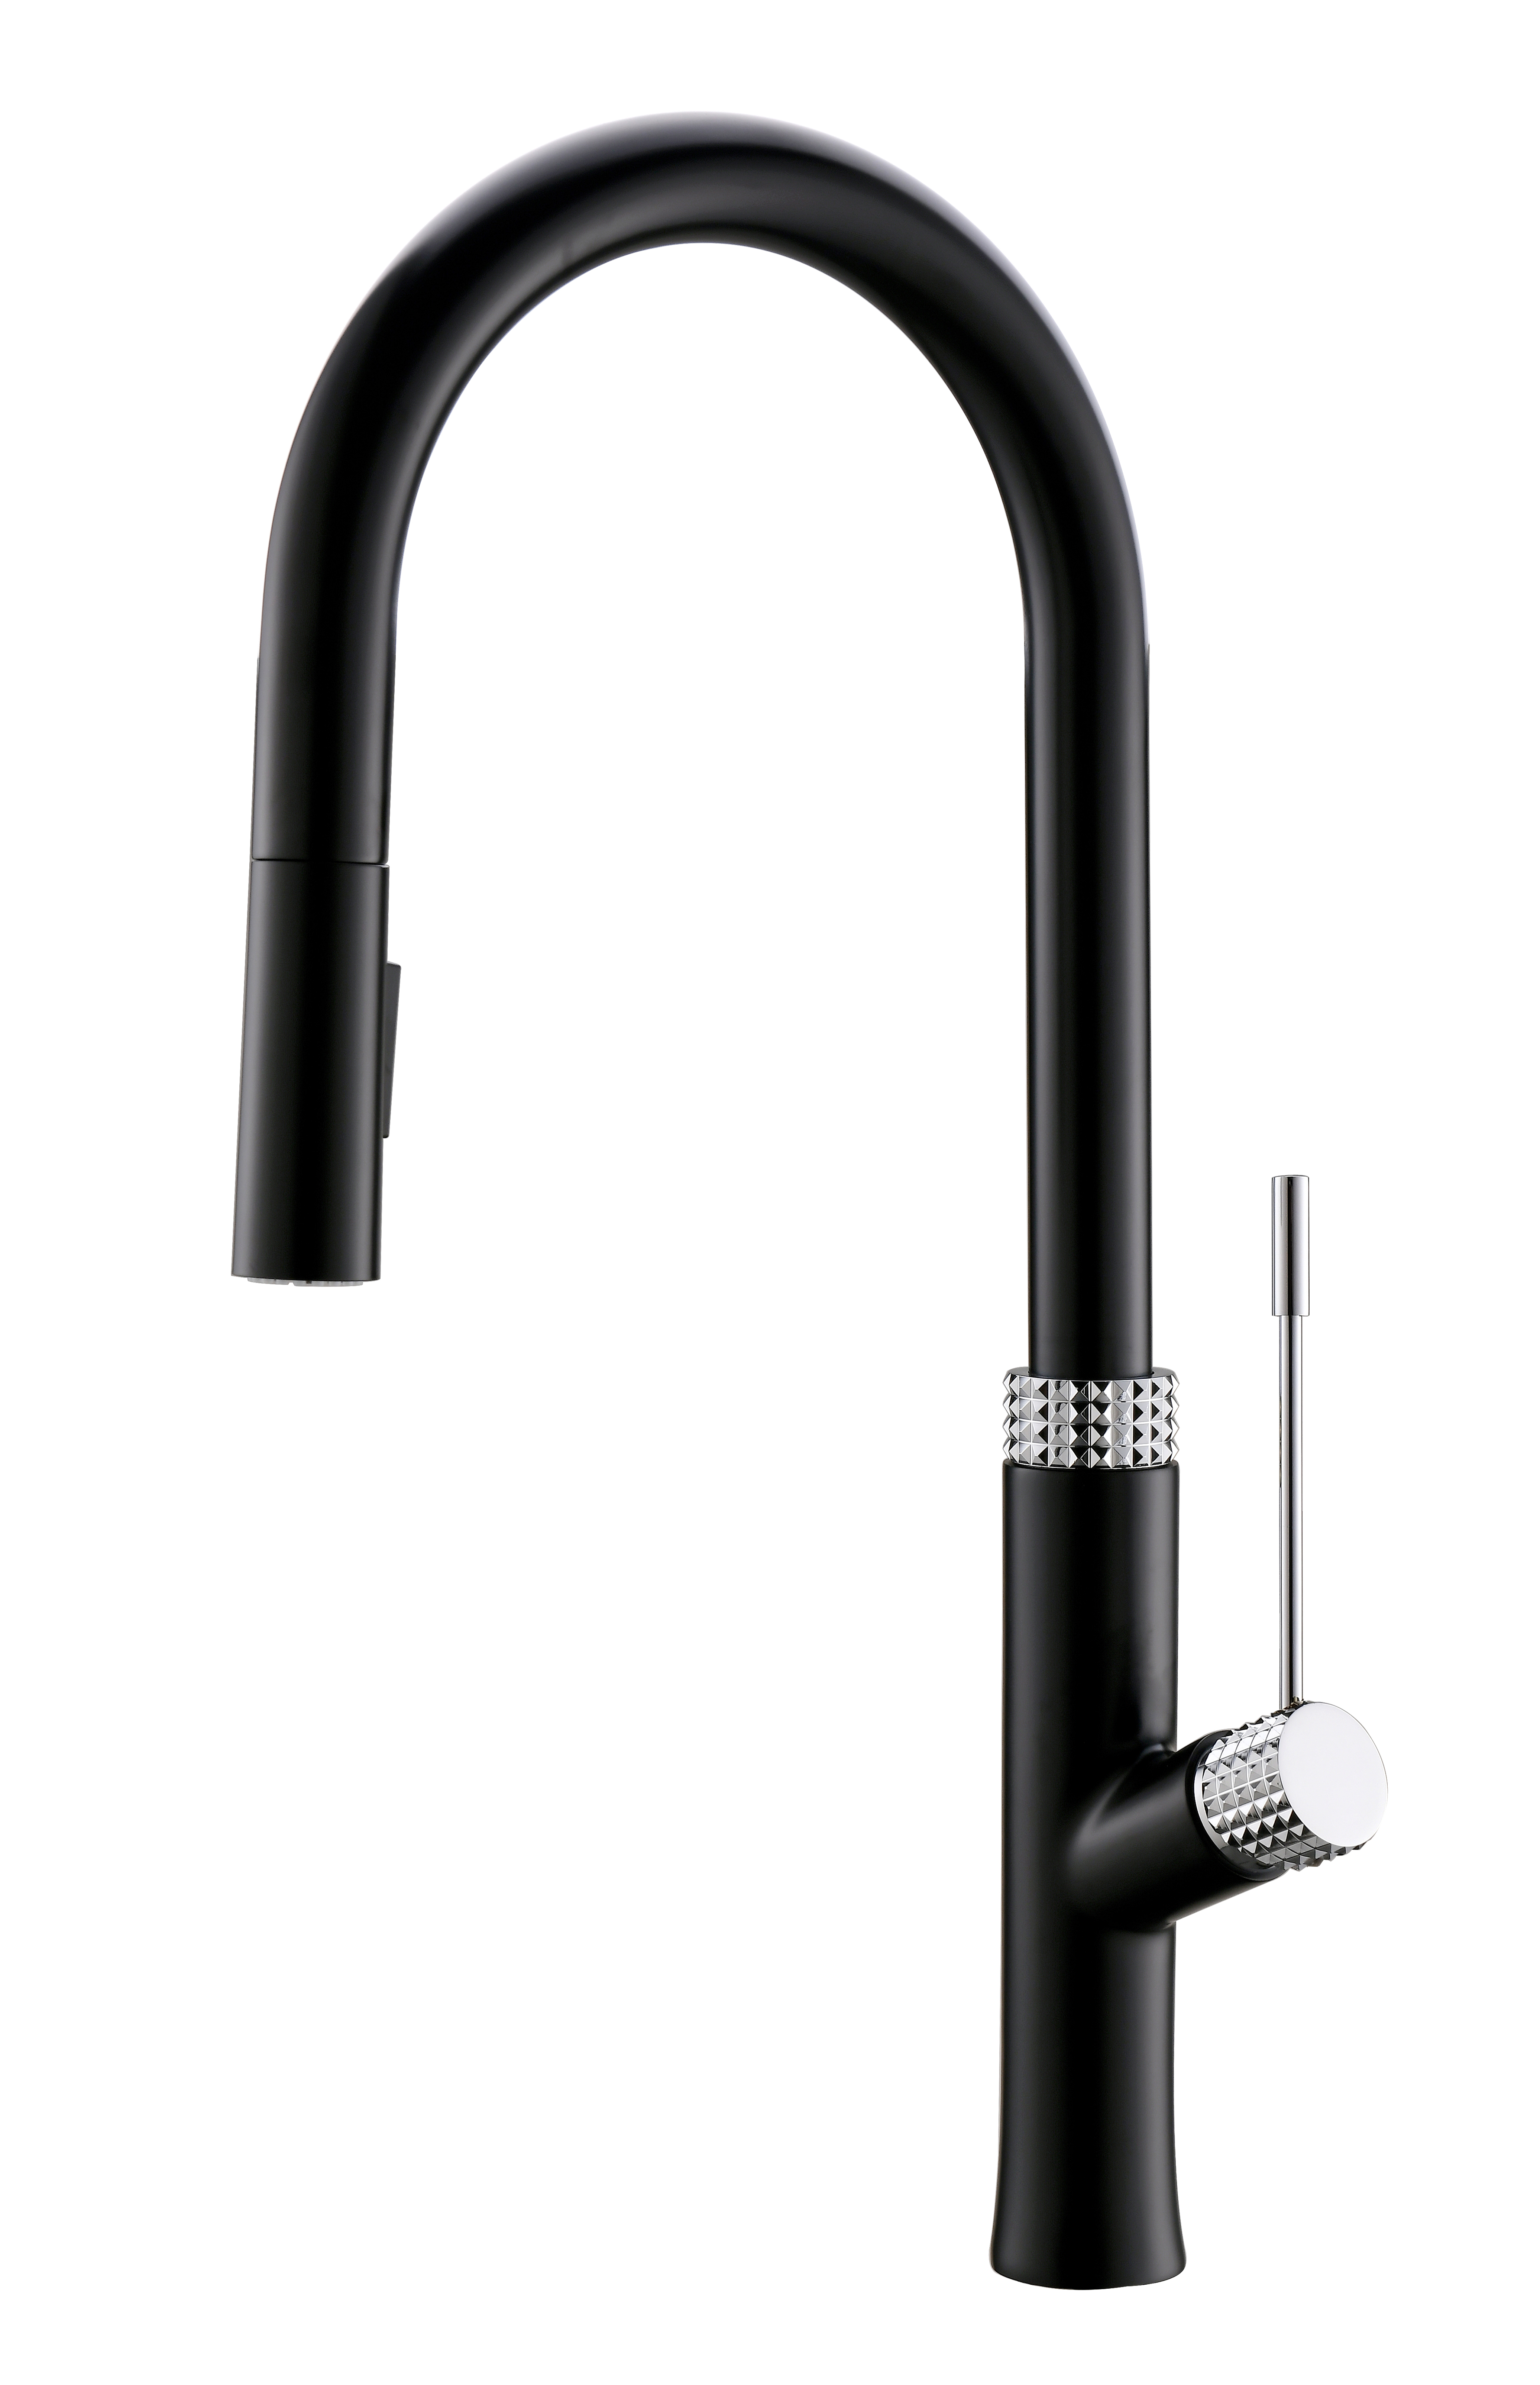 Gowo Water Filter For Faucet Matt Black Kitchen Mixer With High Quality